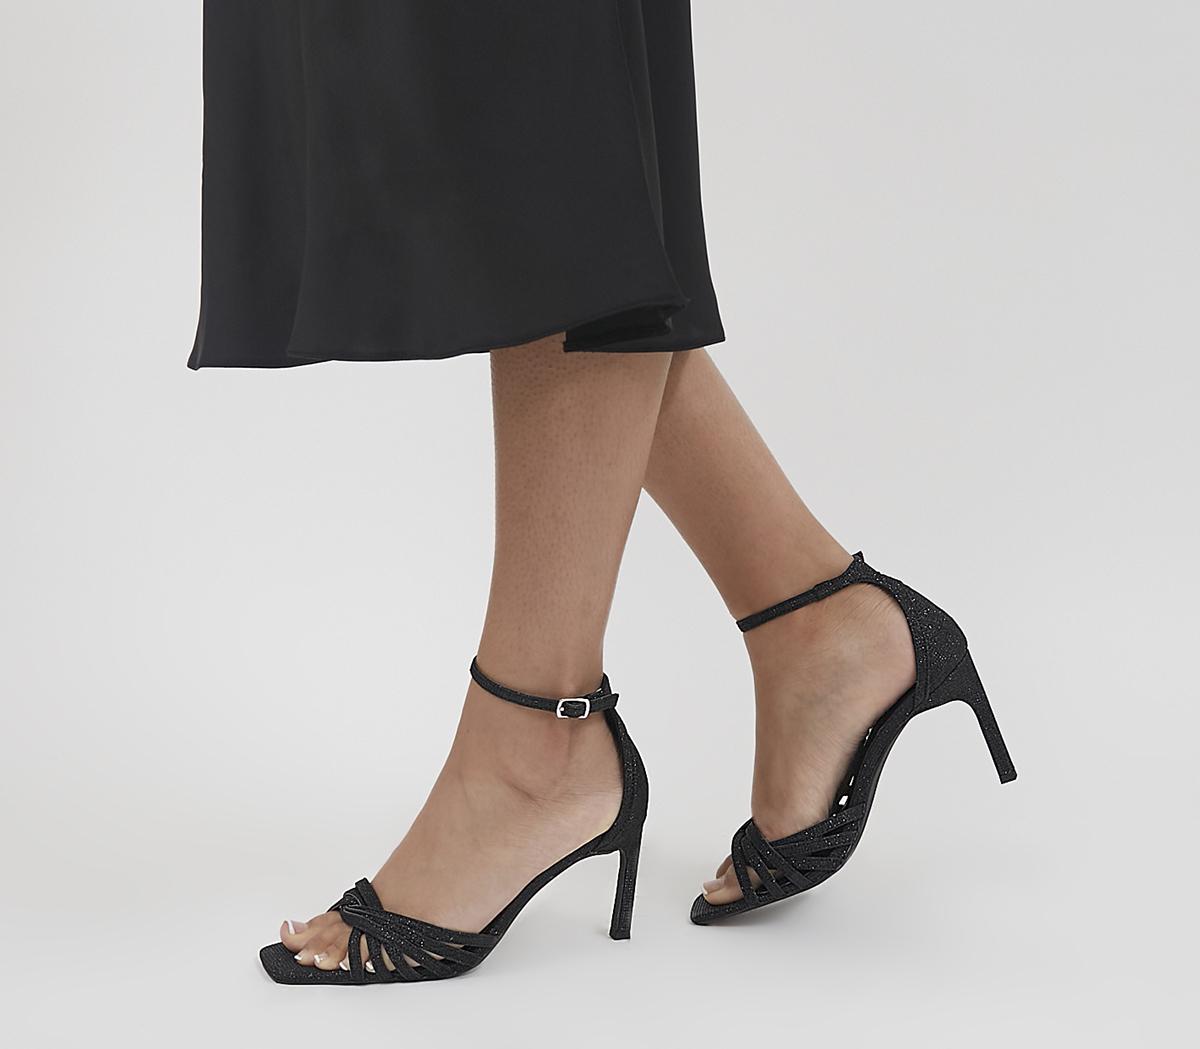 OfficeMackie Two Part Heeled SandalsBlack